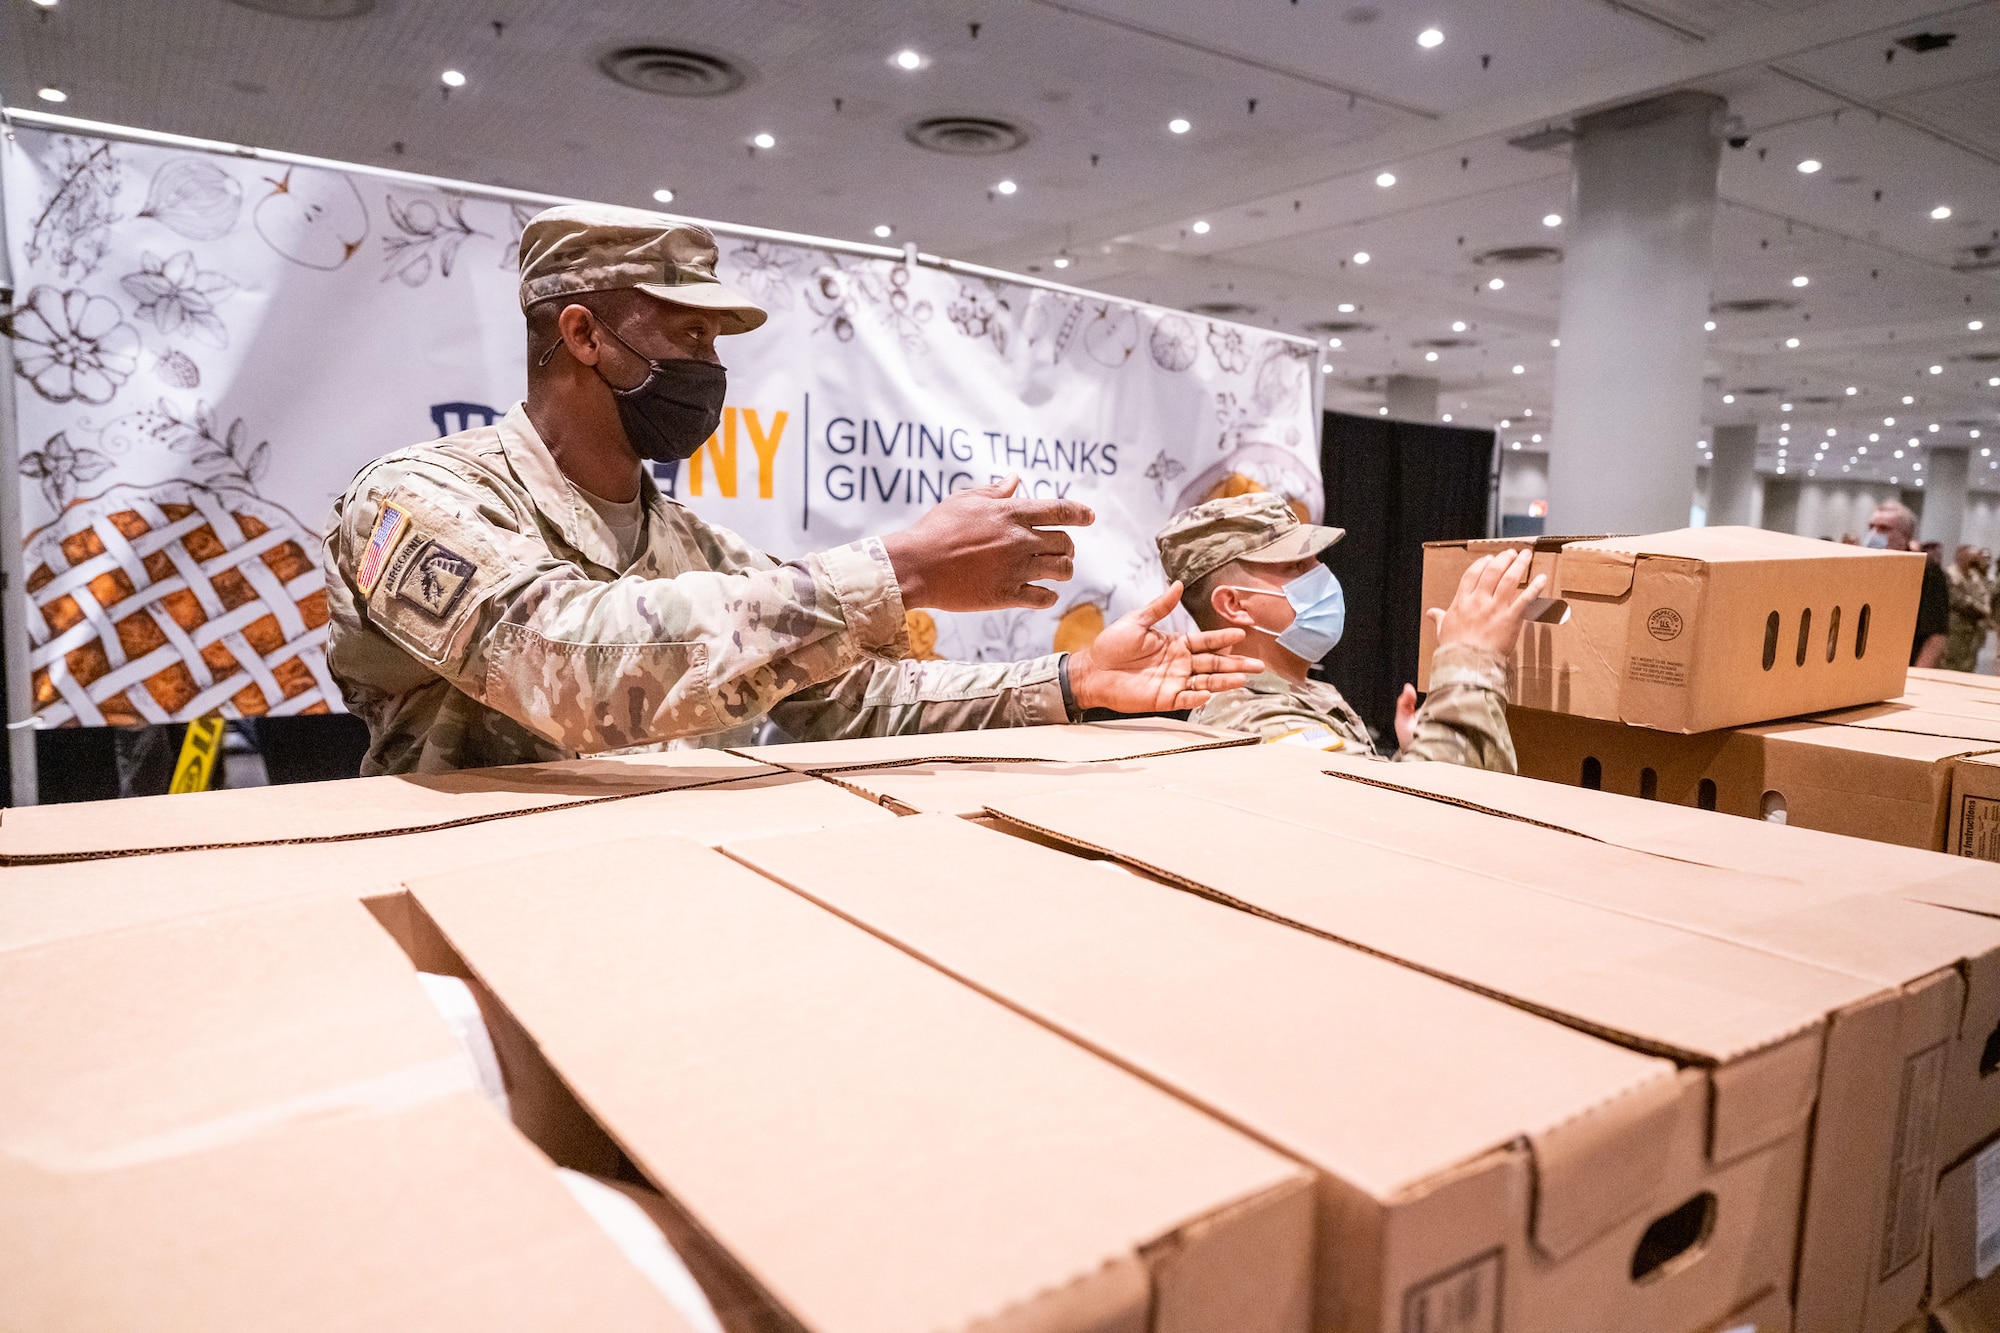 New York National Guard Soldiers and Airmen assigned to Joint Task Force Empire Shield assist in packaging Thanksgiving turkeys for distribution to families across the state at the Jacob Javits Convention Center in New York City November 22, 2021. The New York National Guard provided more than 50 Soldiers and Airmen to assist in the packaging of 3,200 turkeys for families experience food insecurity through the corporate donations of more than $100,000 for the Thanksgiving holiday at food pantries supported by Feed New York State. Photo courtesy of Darren McGee, Office of Governor Kathy Hochul.